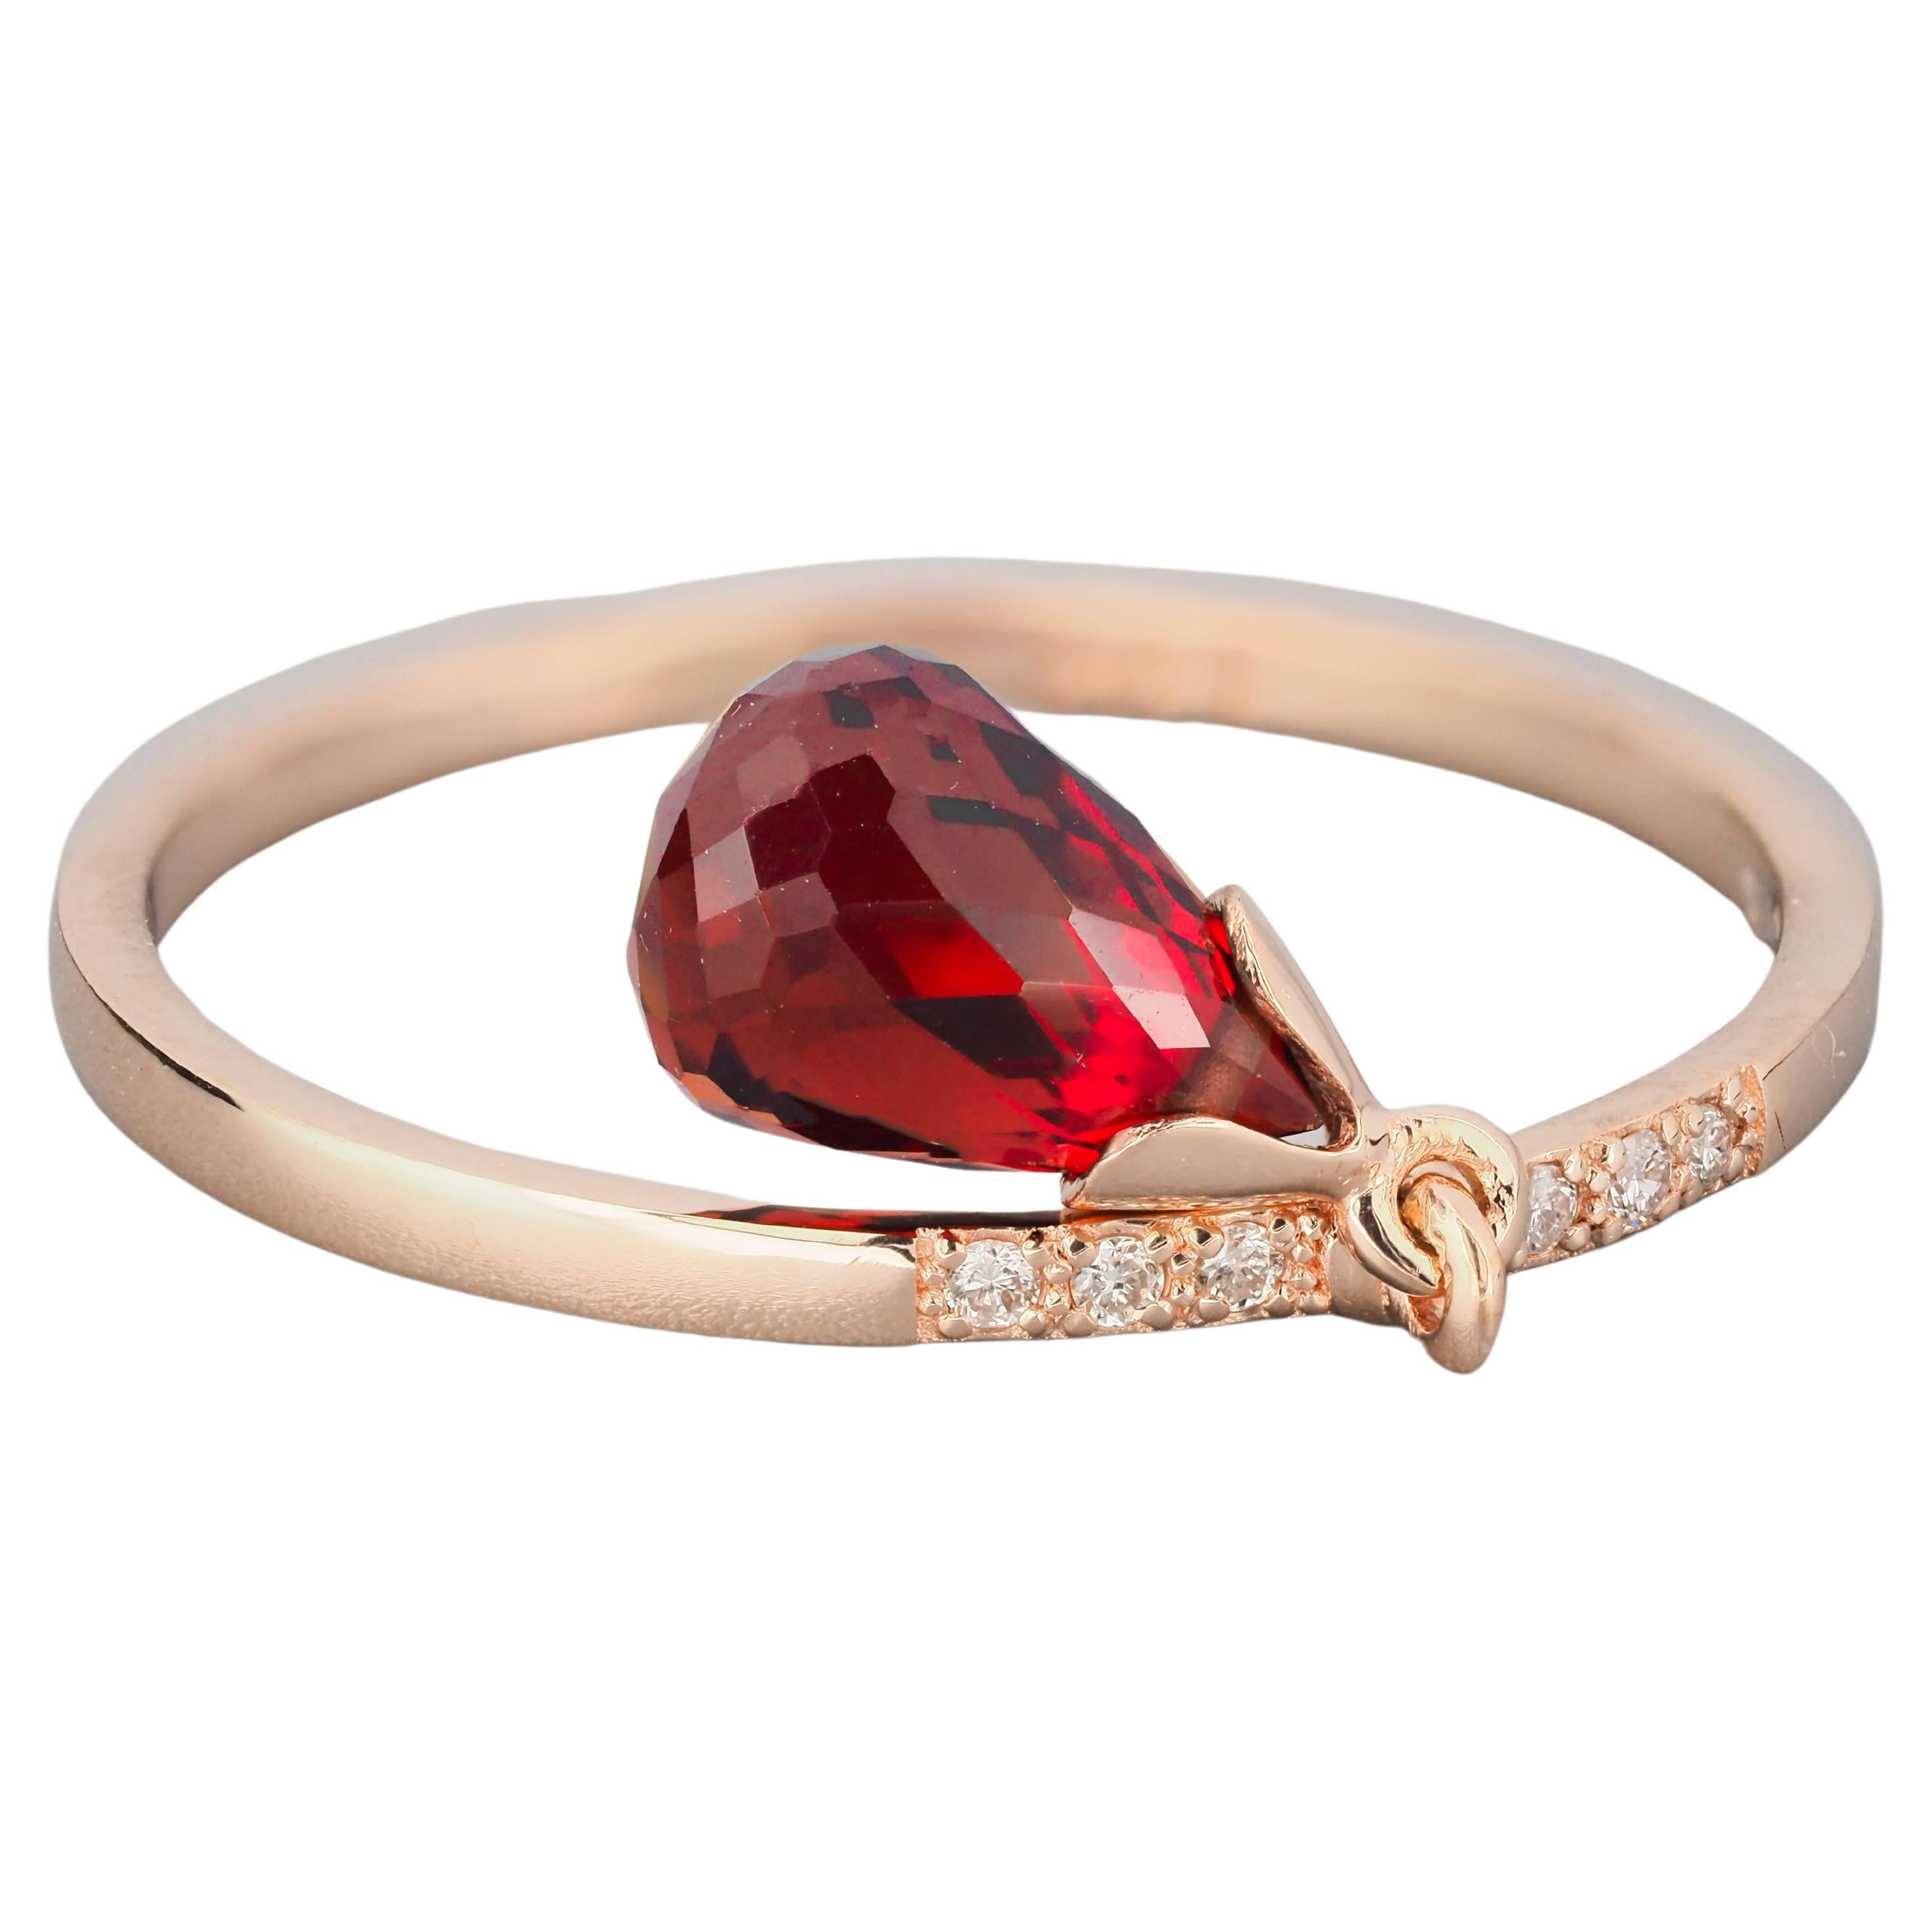 14k Gold Ring with Briolette Cut Garnet and Diamonds